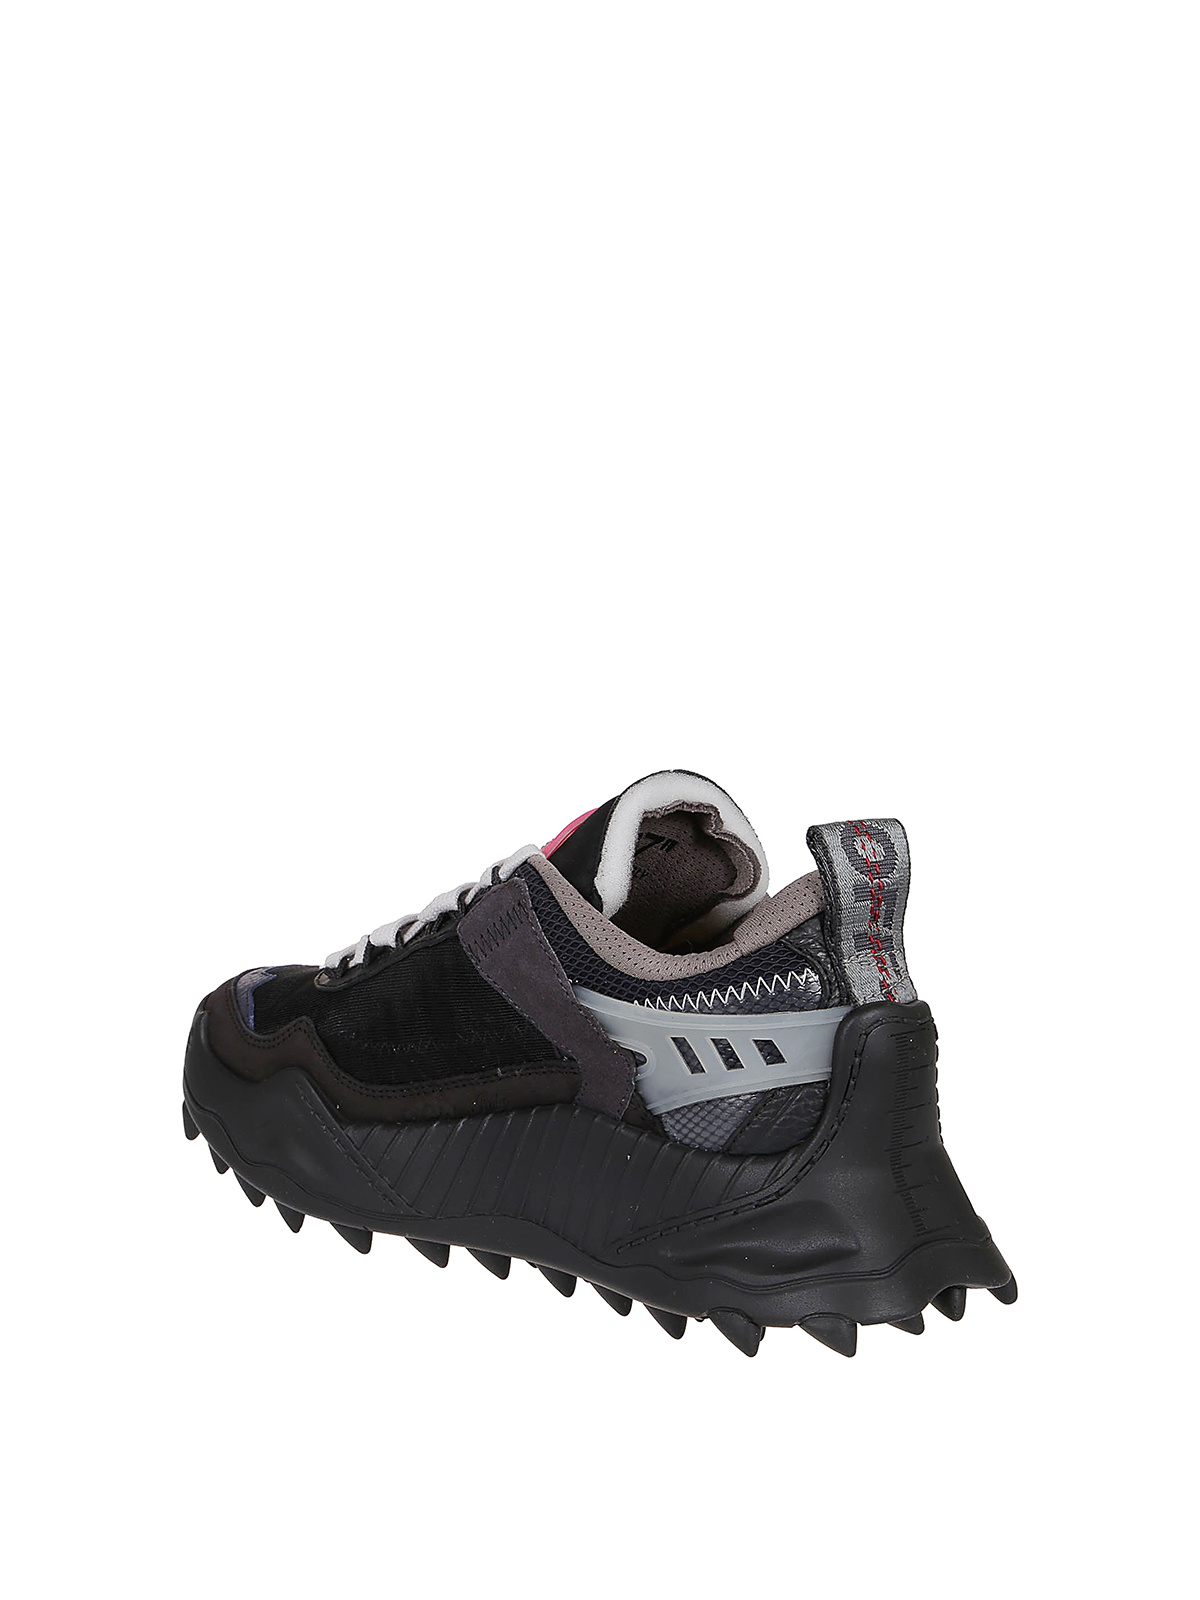 Off-White Odsy-1000 Sneakers Black